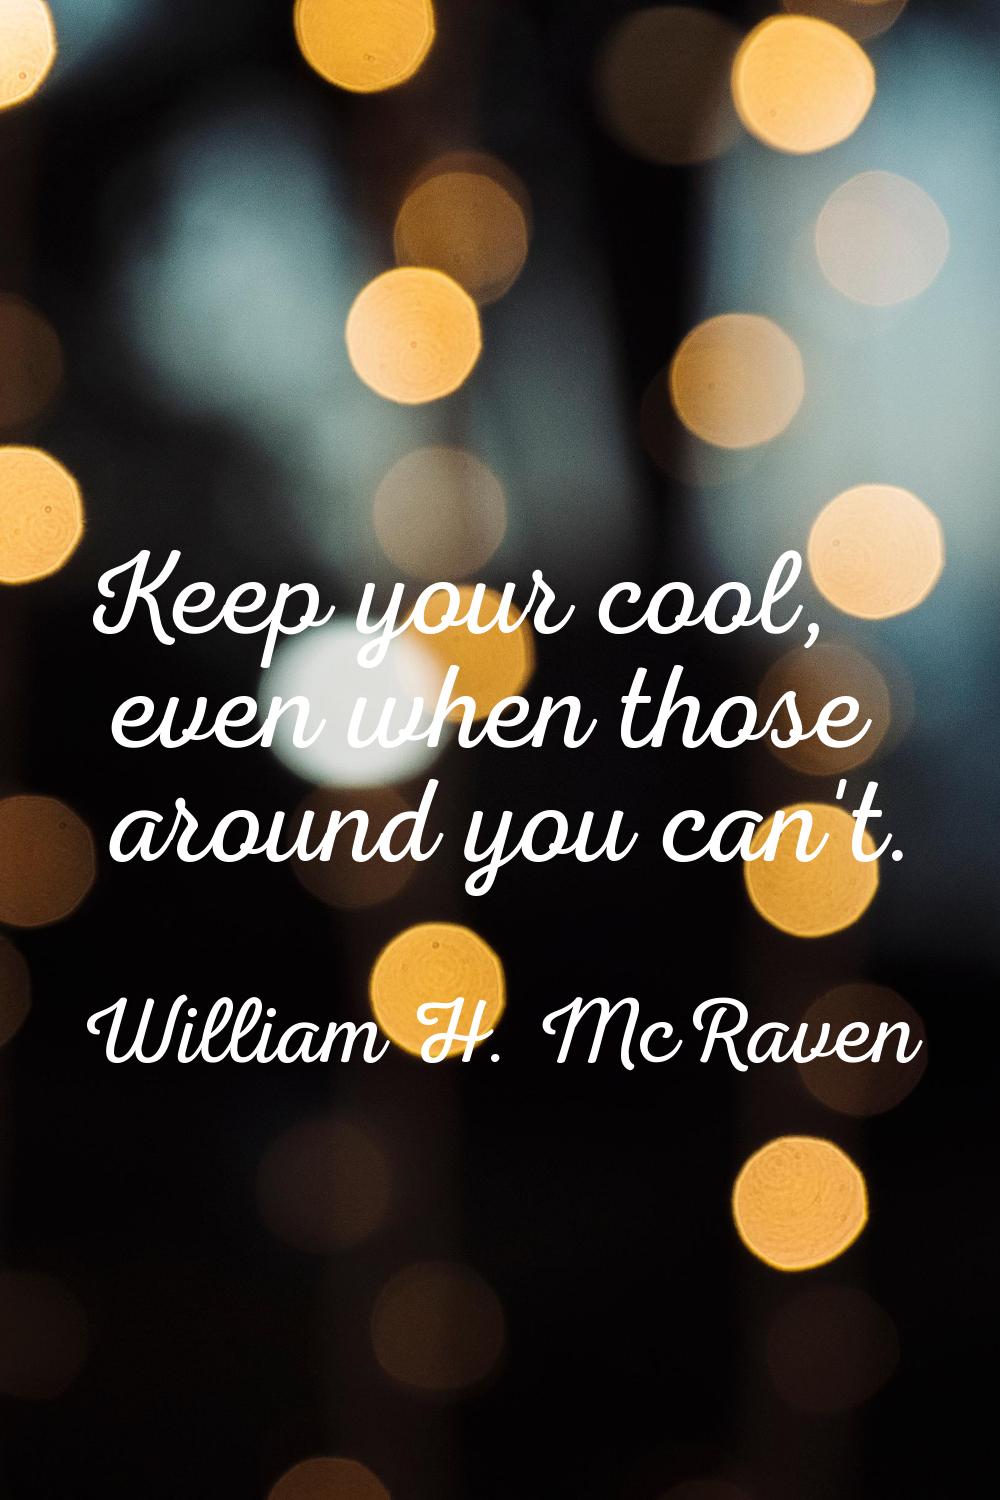 Keep your cool, even when those around you can't.